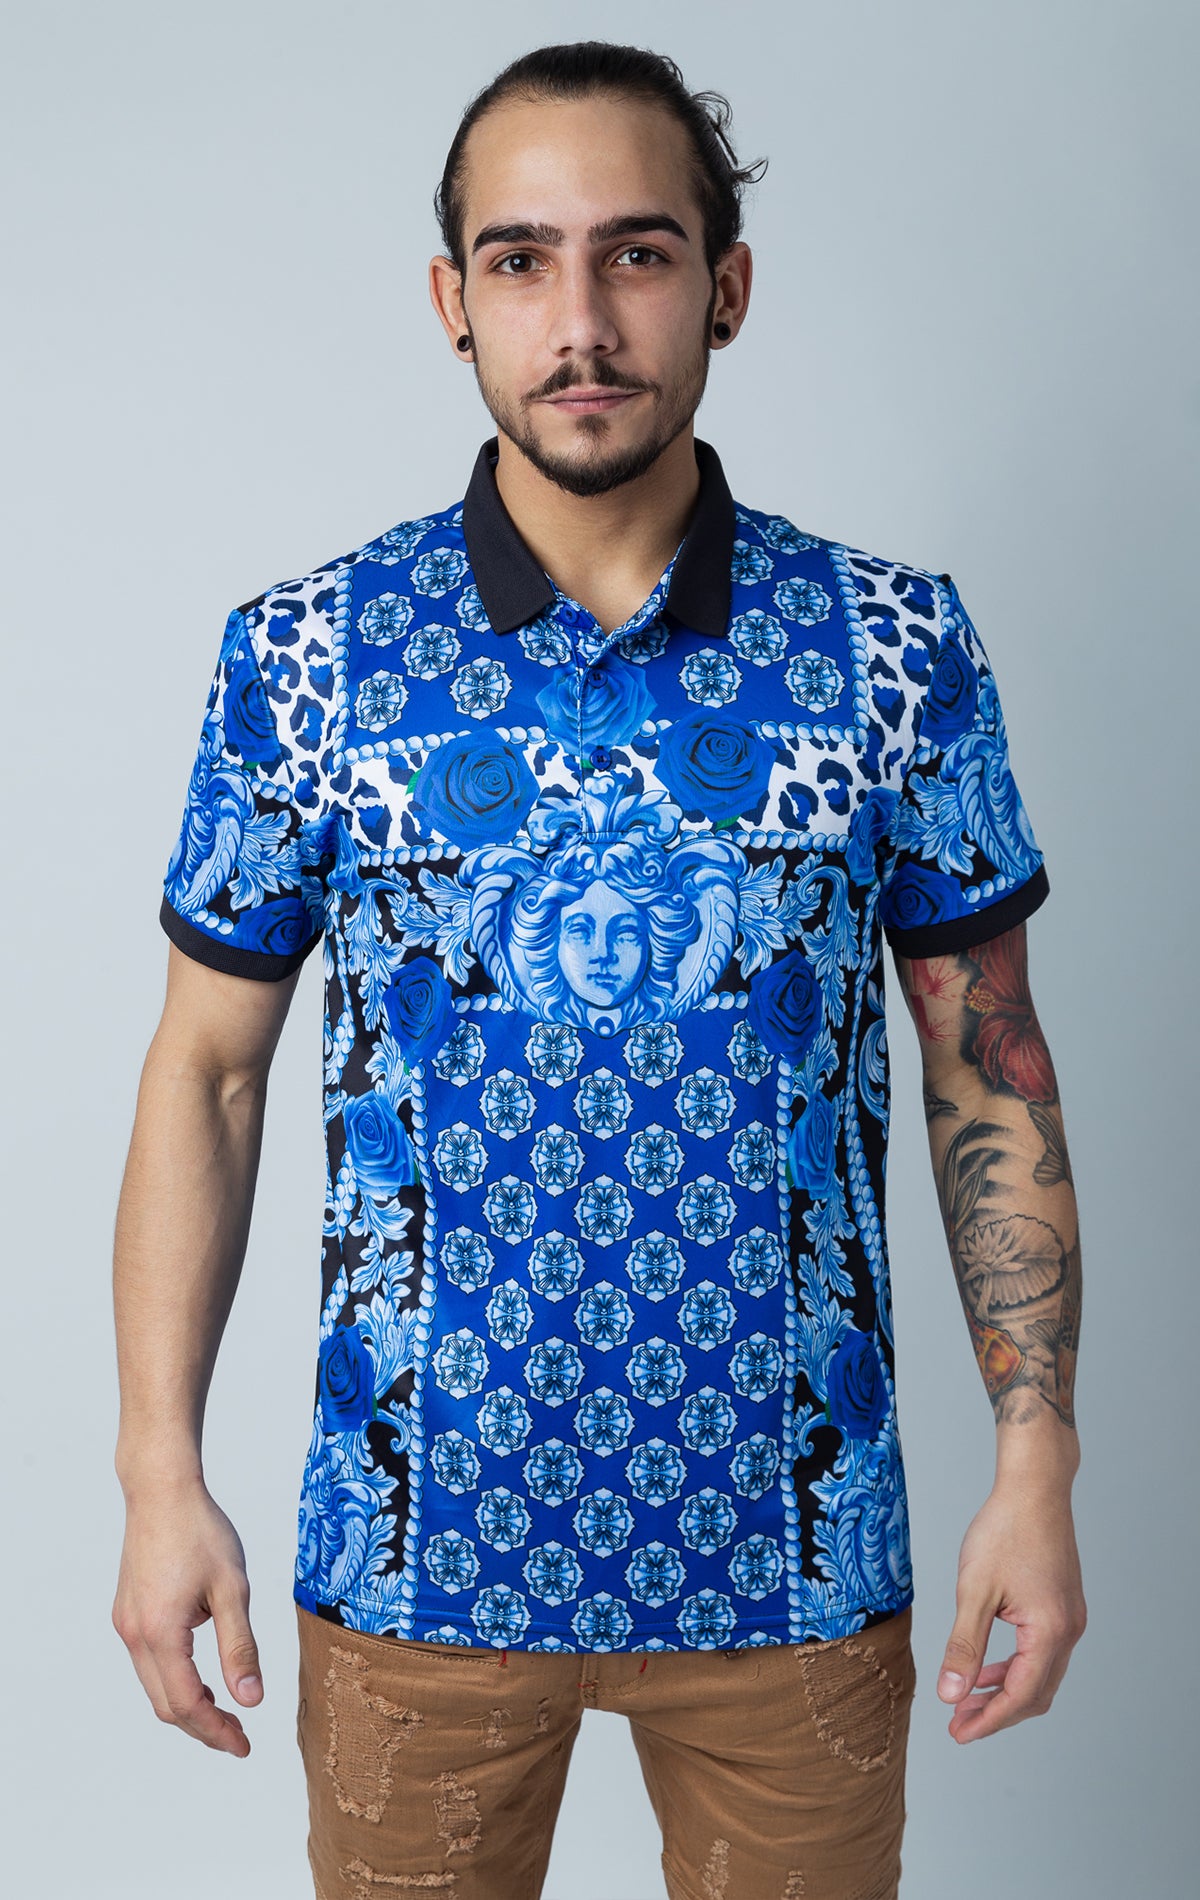 Stylized all over graphic polo shirt with collared detailing, short-sleeved composition, three button front fastening, luxuriously-crafted cotton blend.